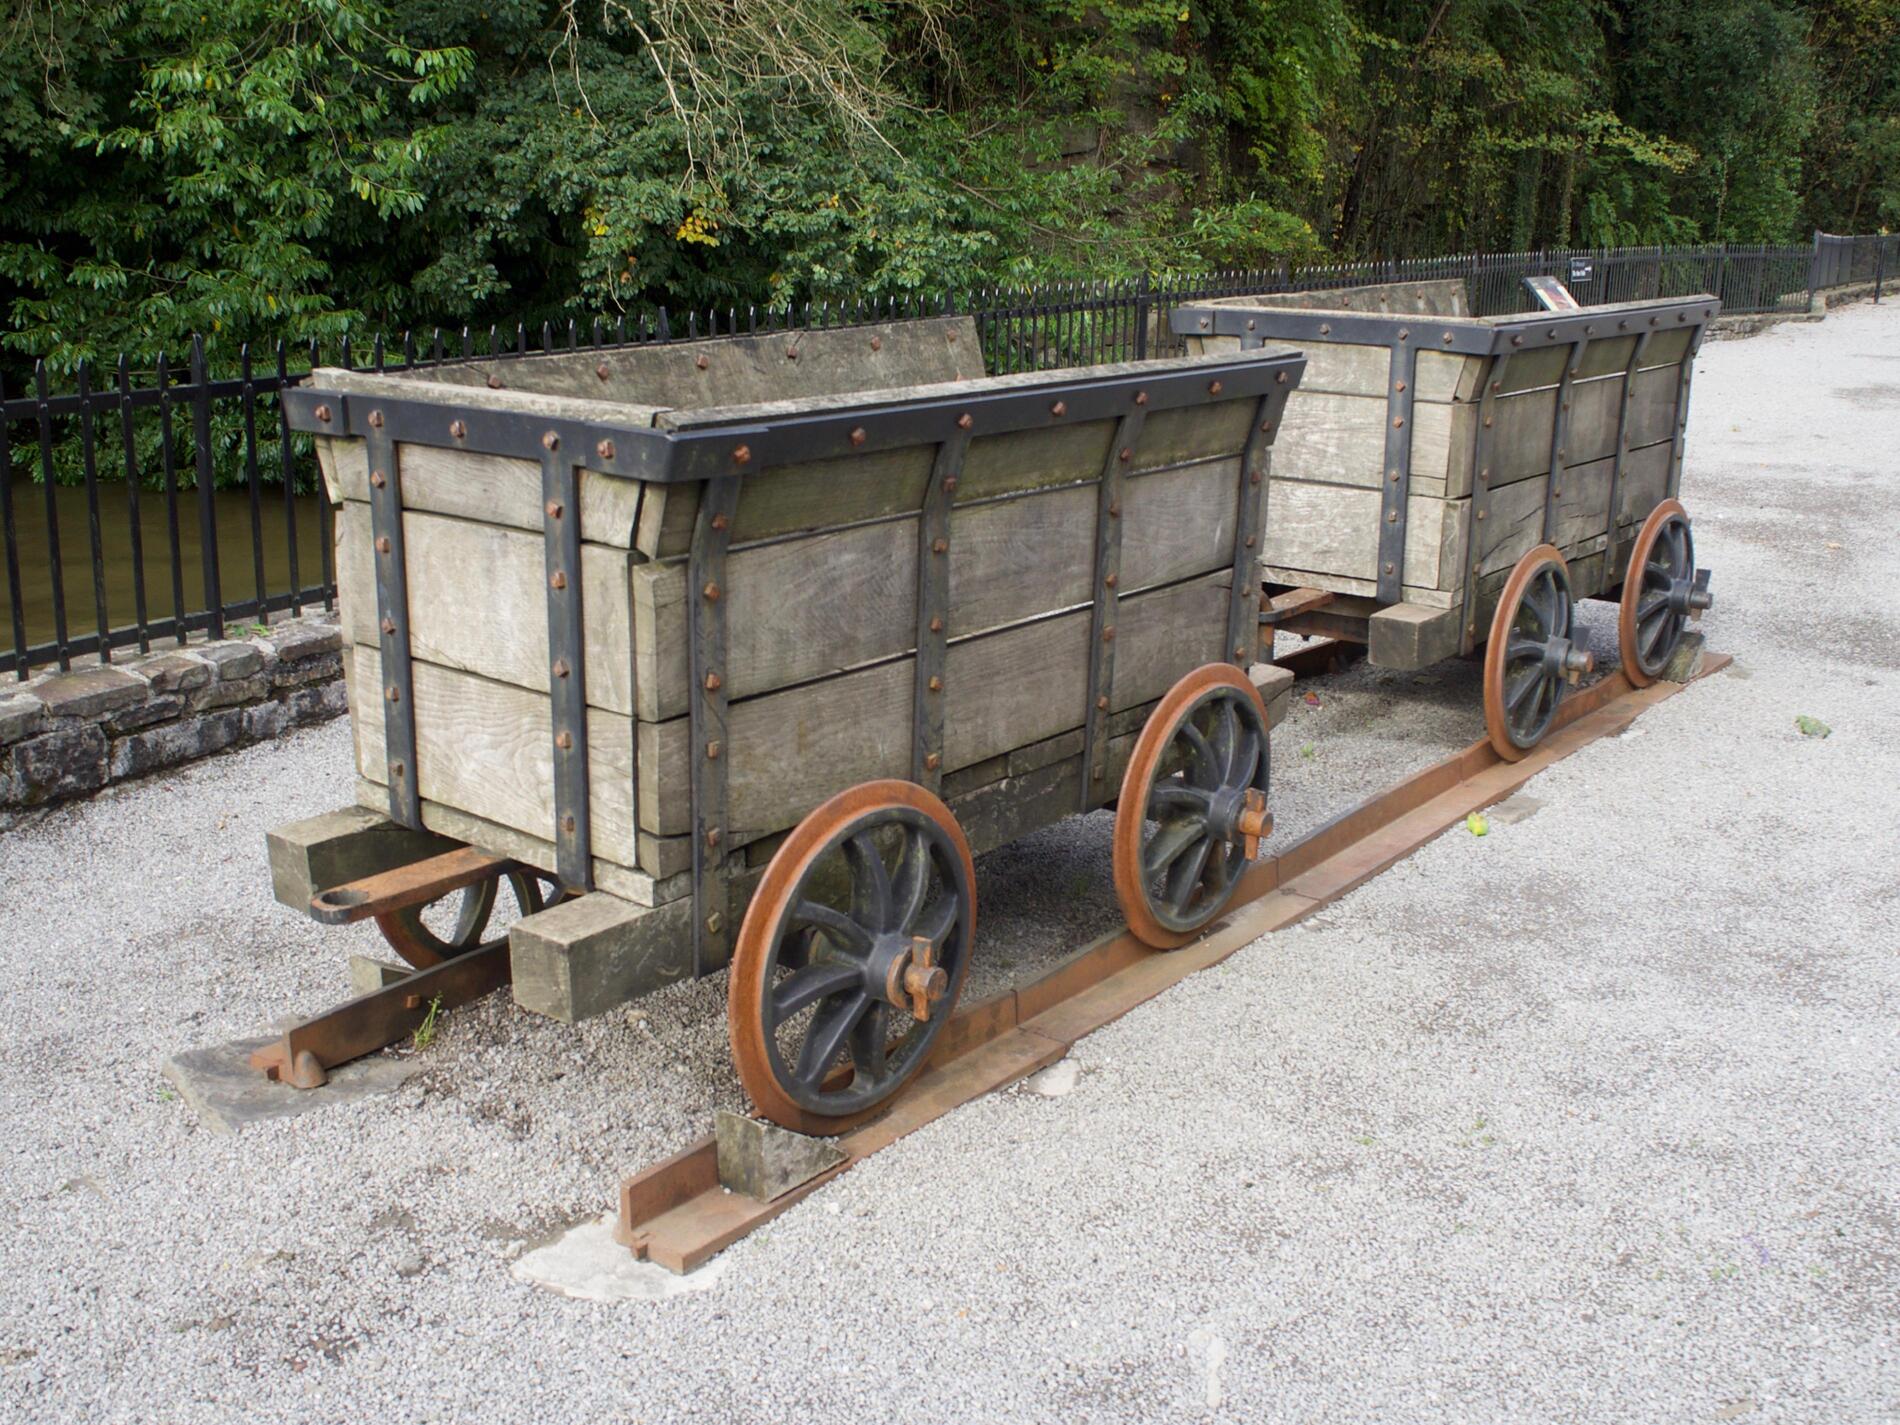 A pair of wooden carts on rusted railway tracks.